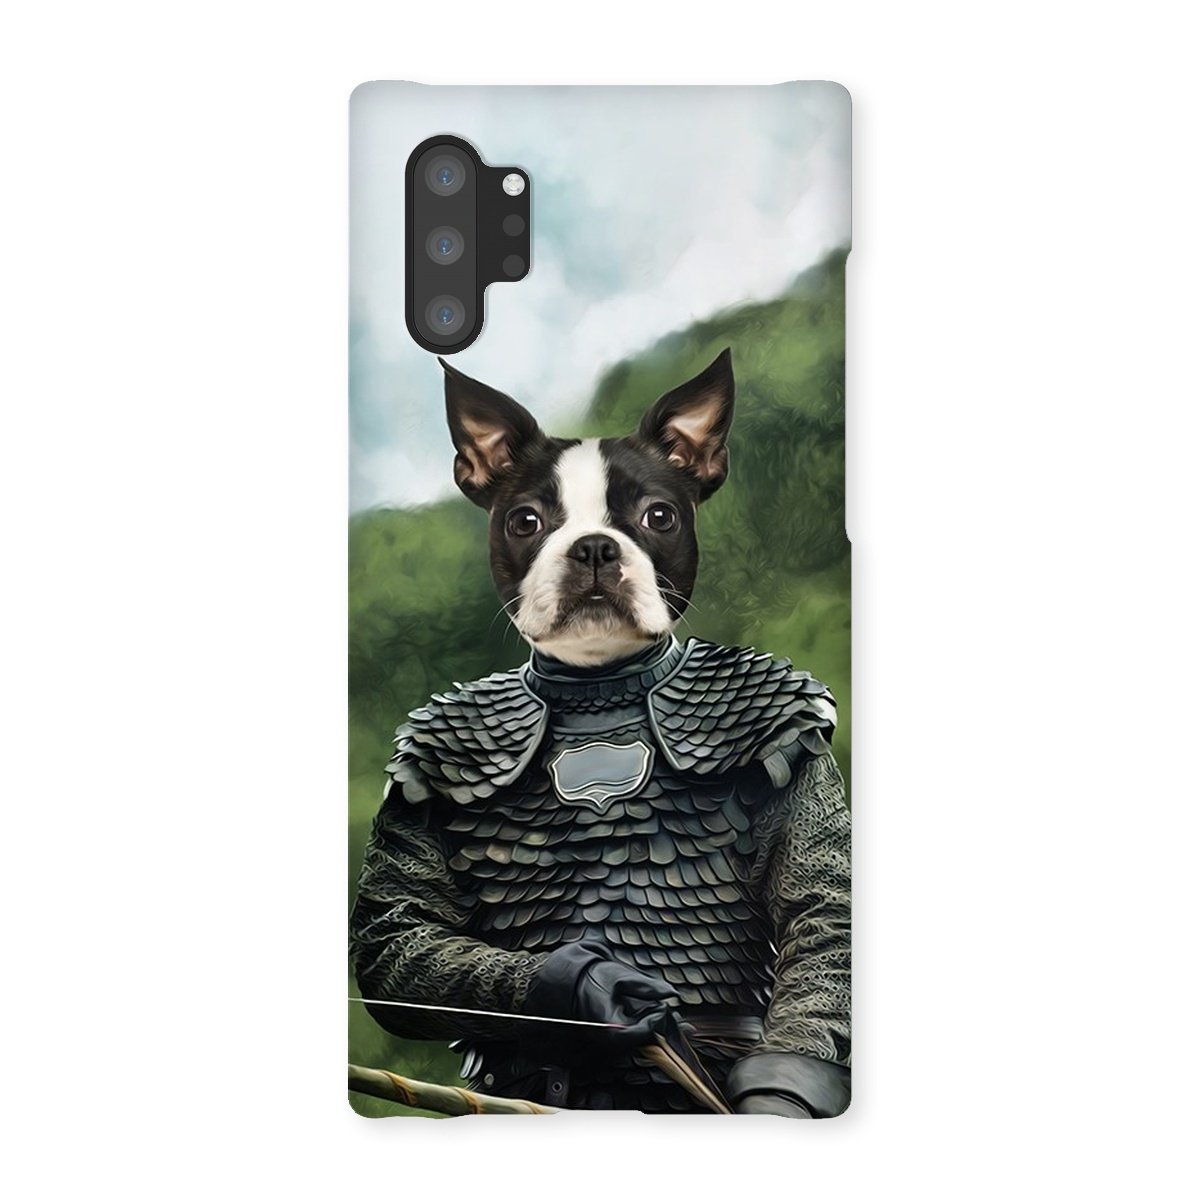 The Bowman (GOT Inspired): Custom Pet Phone Case - Paw & Glory - paw and glory, personalised puppy phone case, pet art phone case uk, personalized iphone 11 case dogs, personalised pet phone case, personalised iphone 11 case dogs, pet phone case, Pet Portrait phone case,